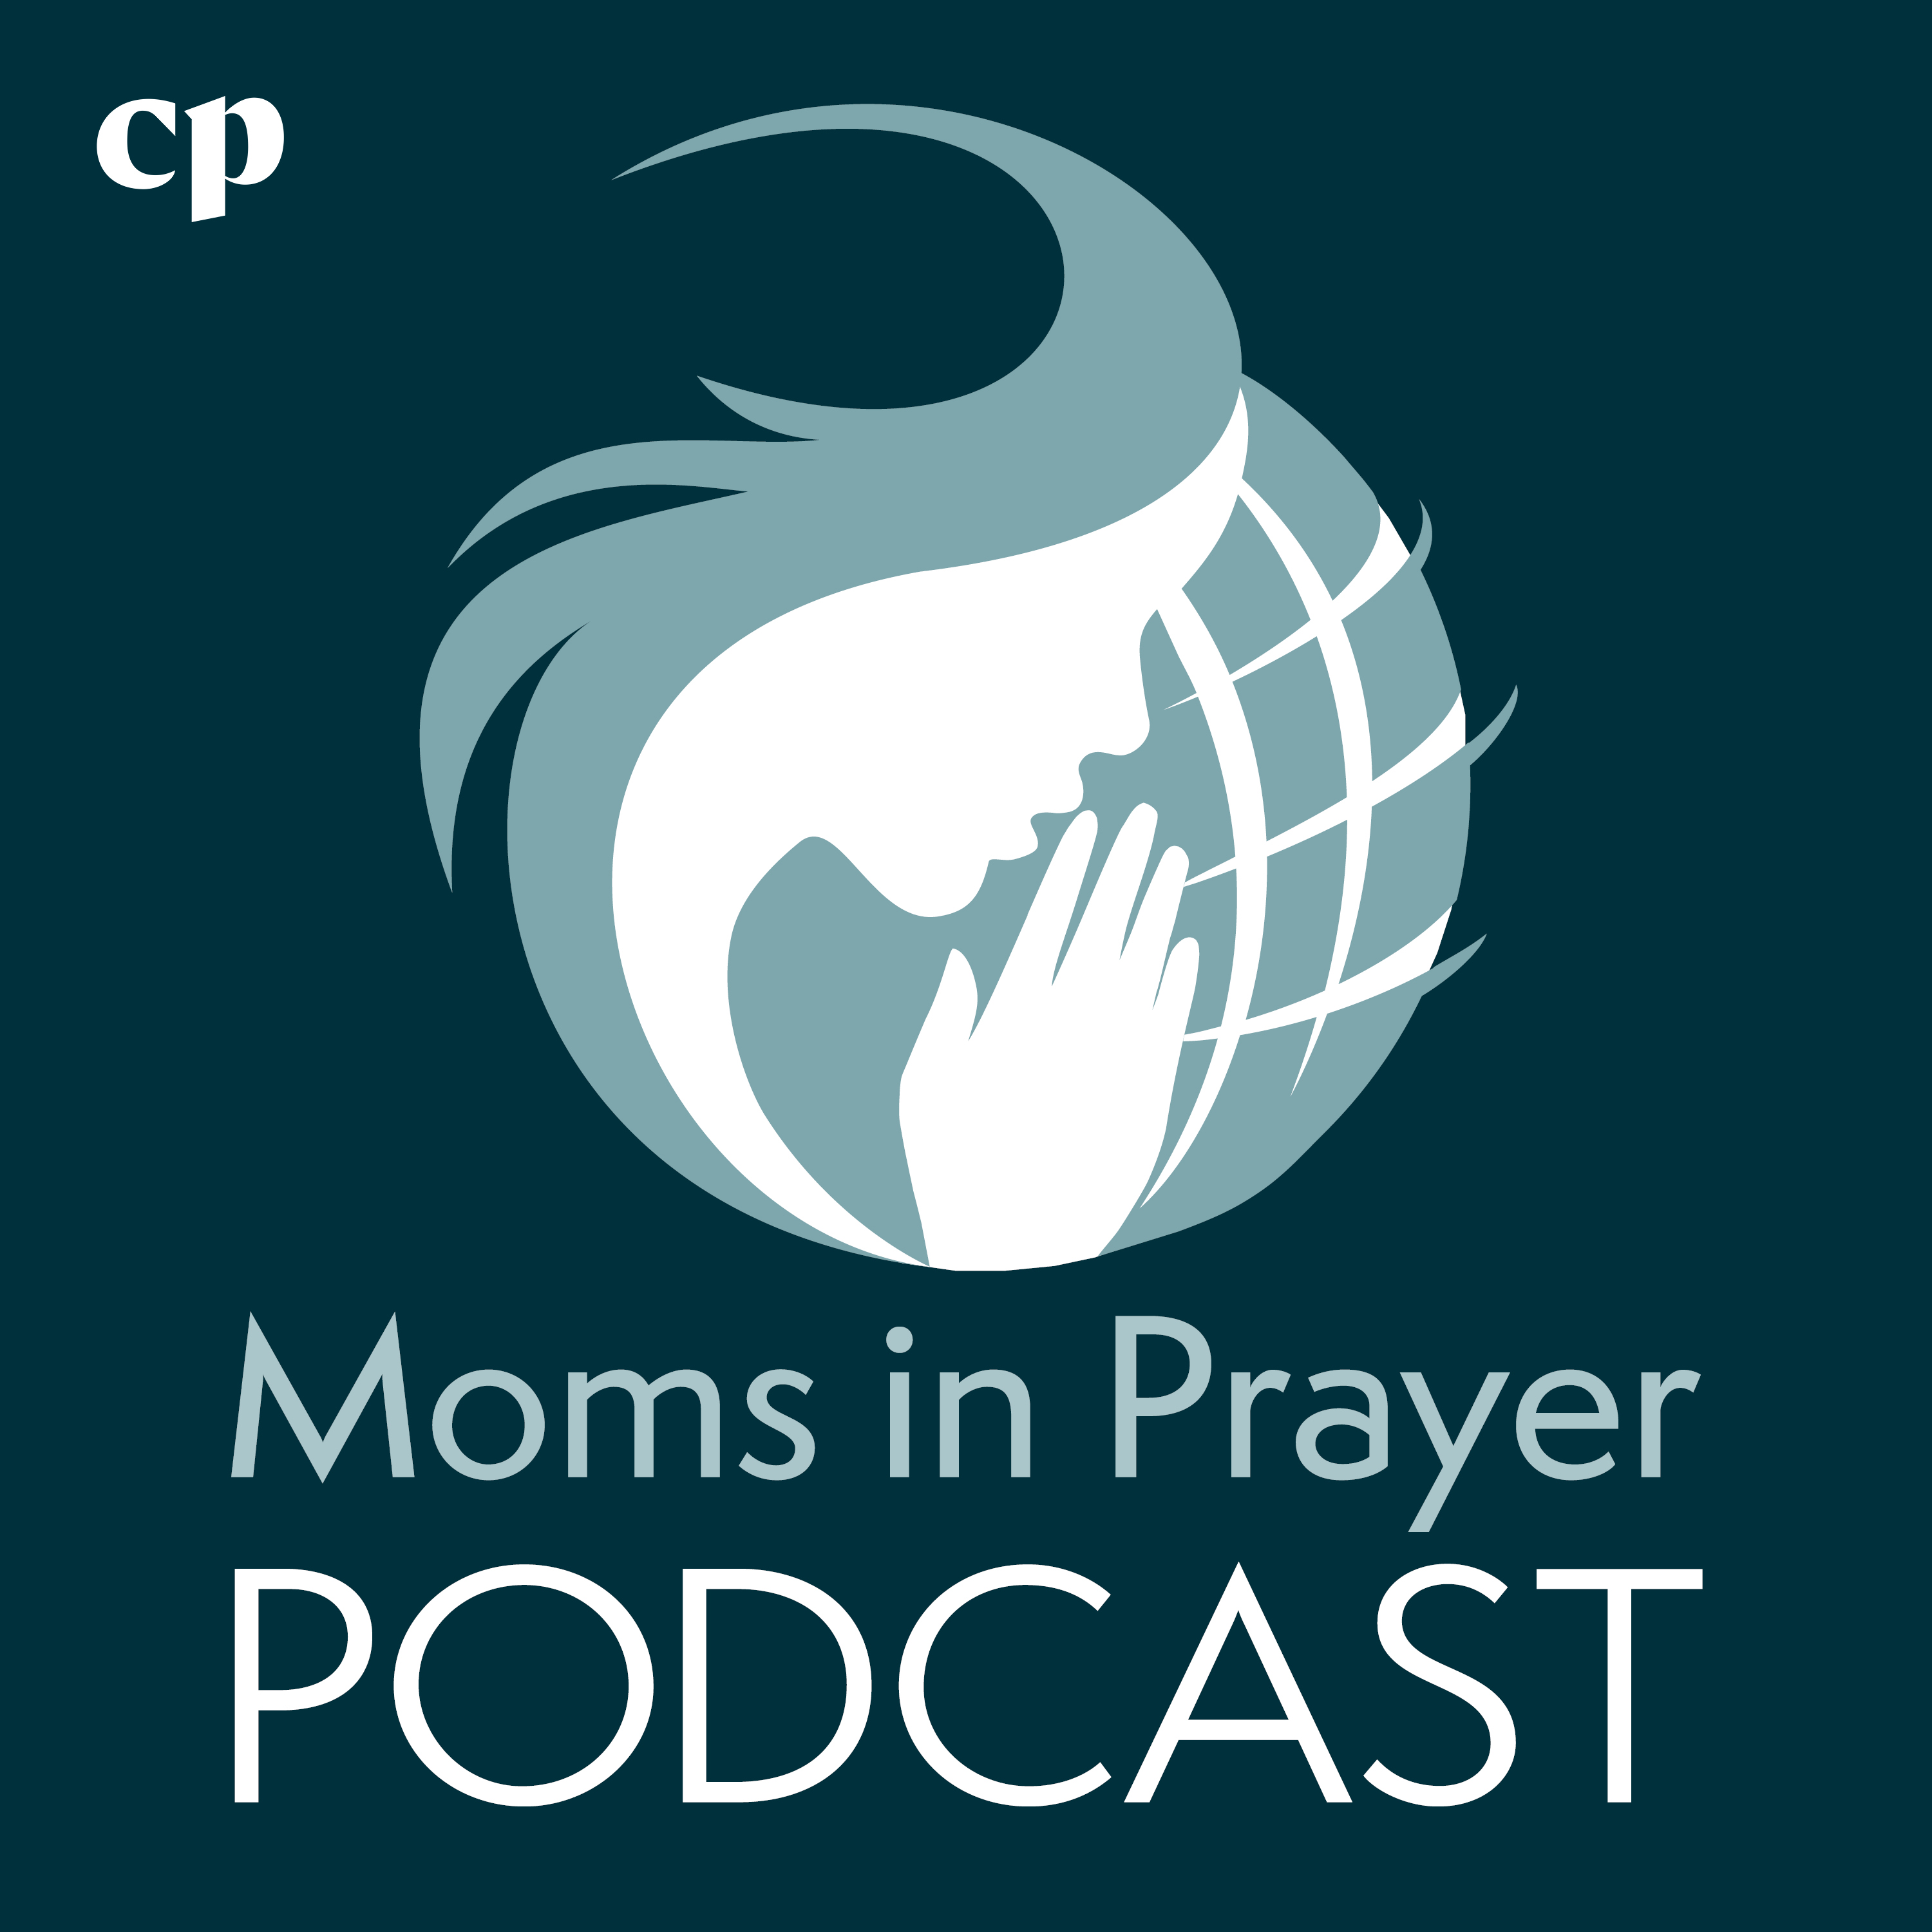 Episode 134 - Global Report: Praying for India and Asia with Stephanie McDermott and Sneha Thomas